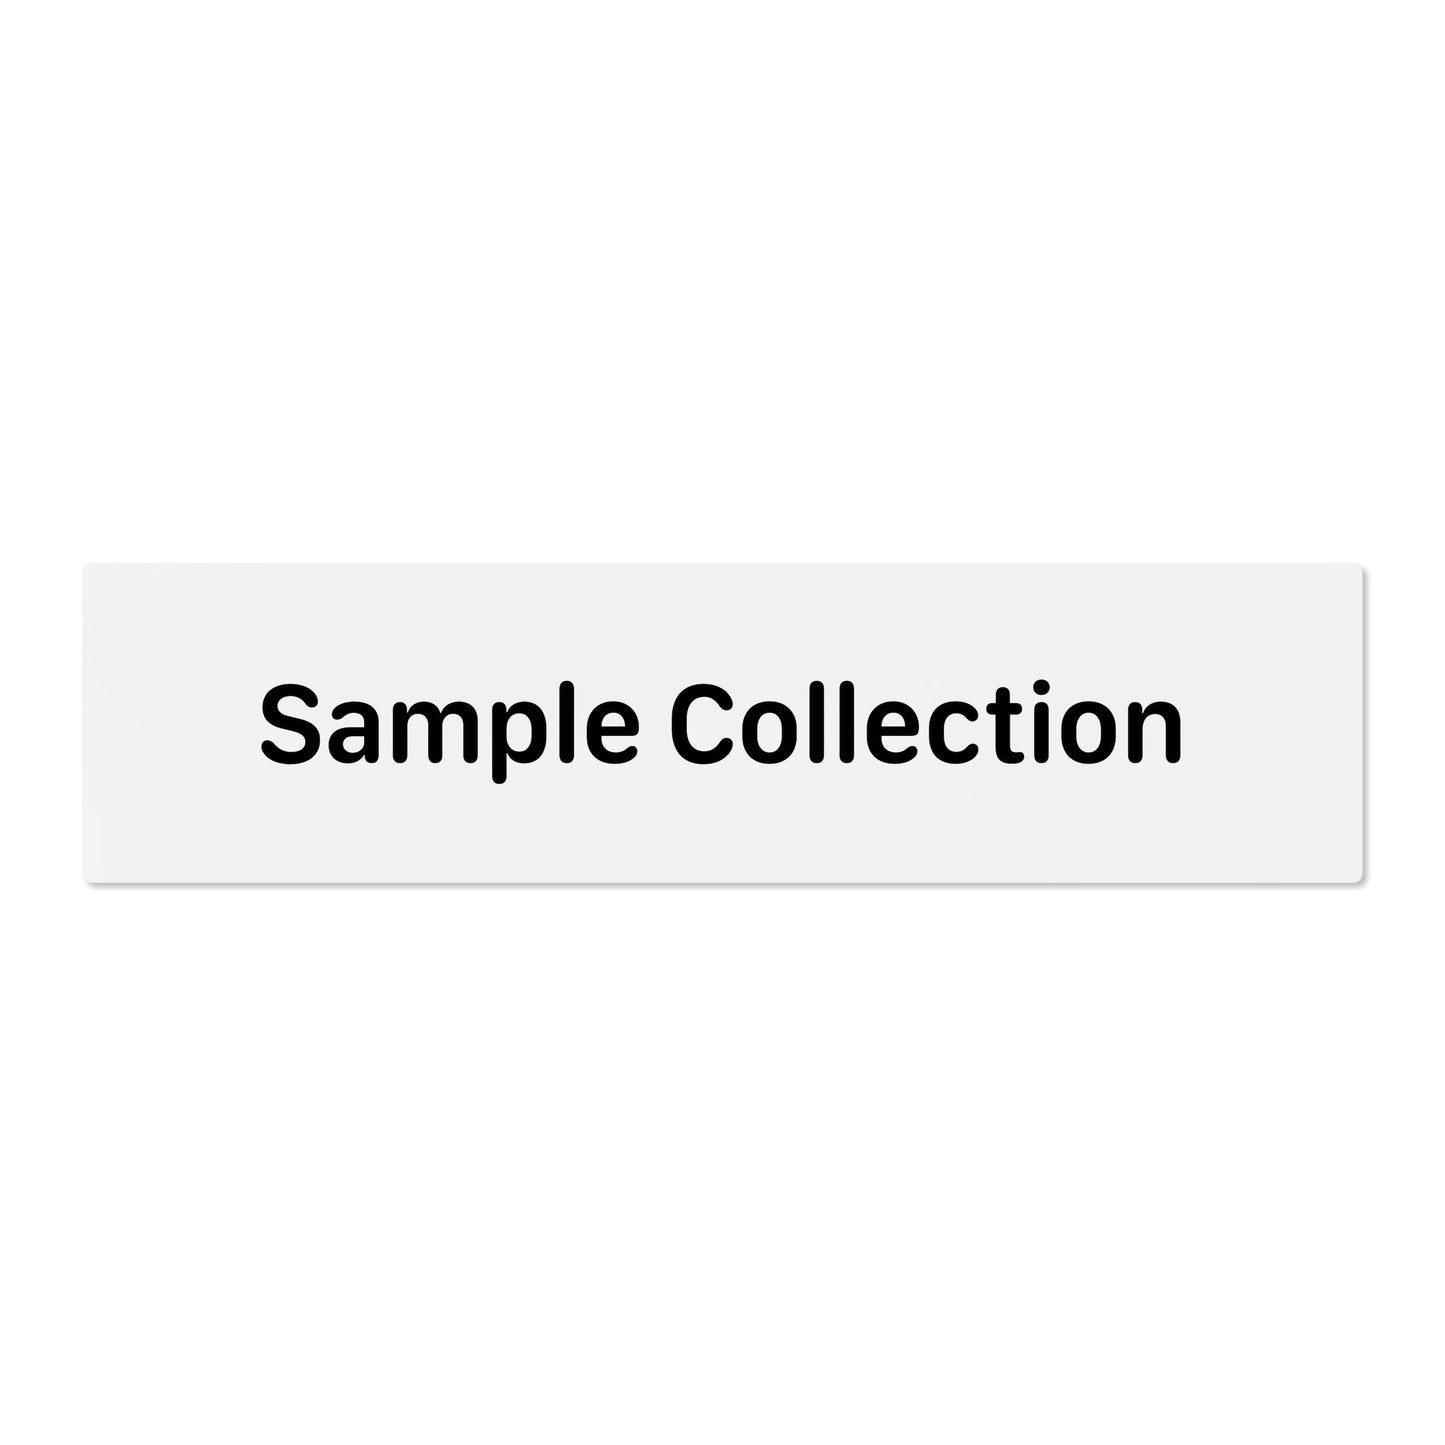 Sample Collection